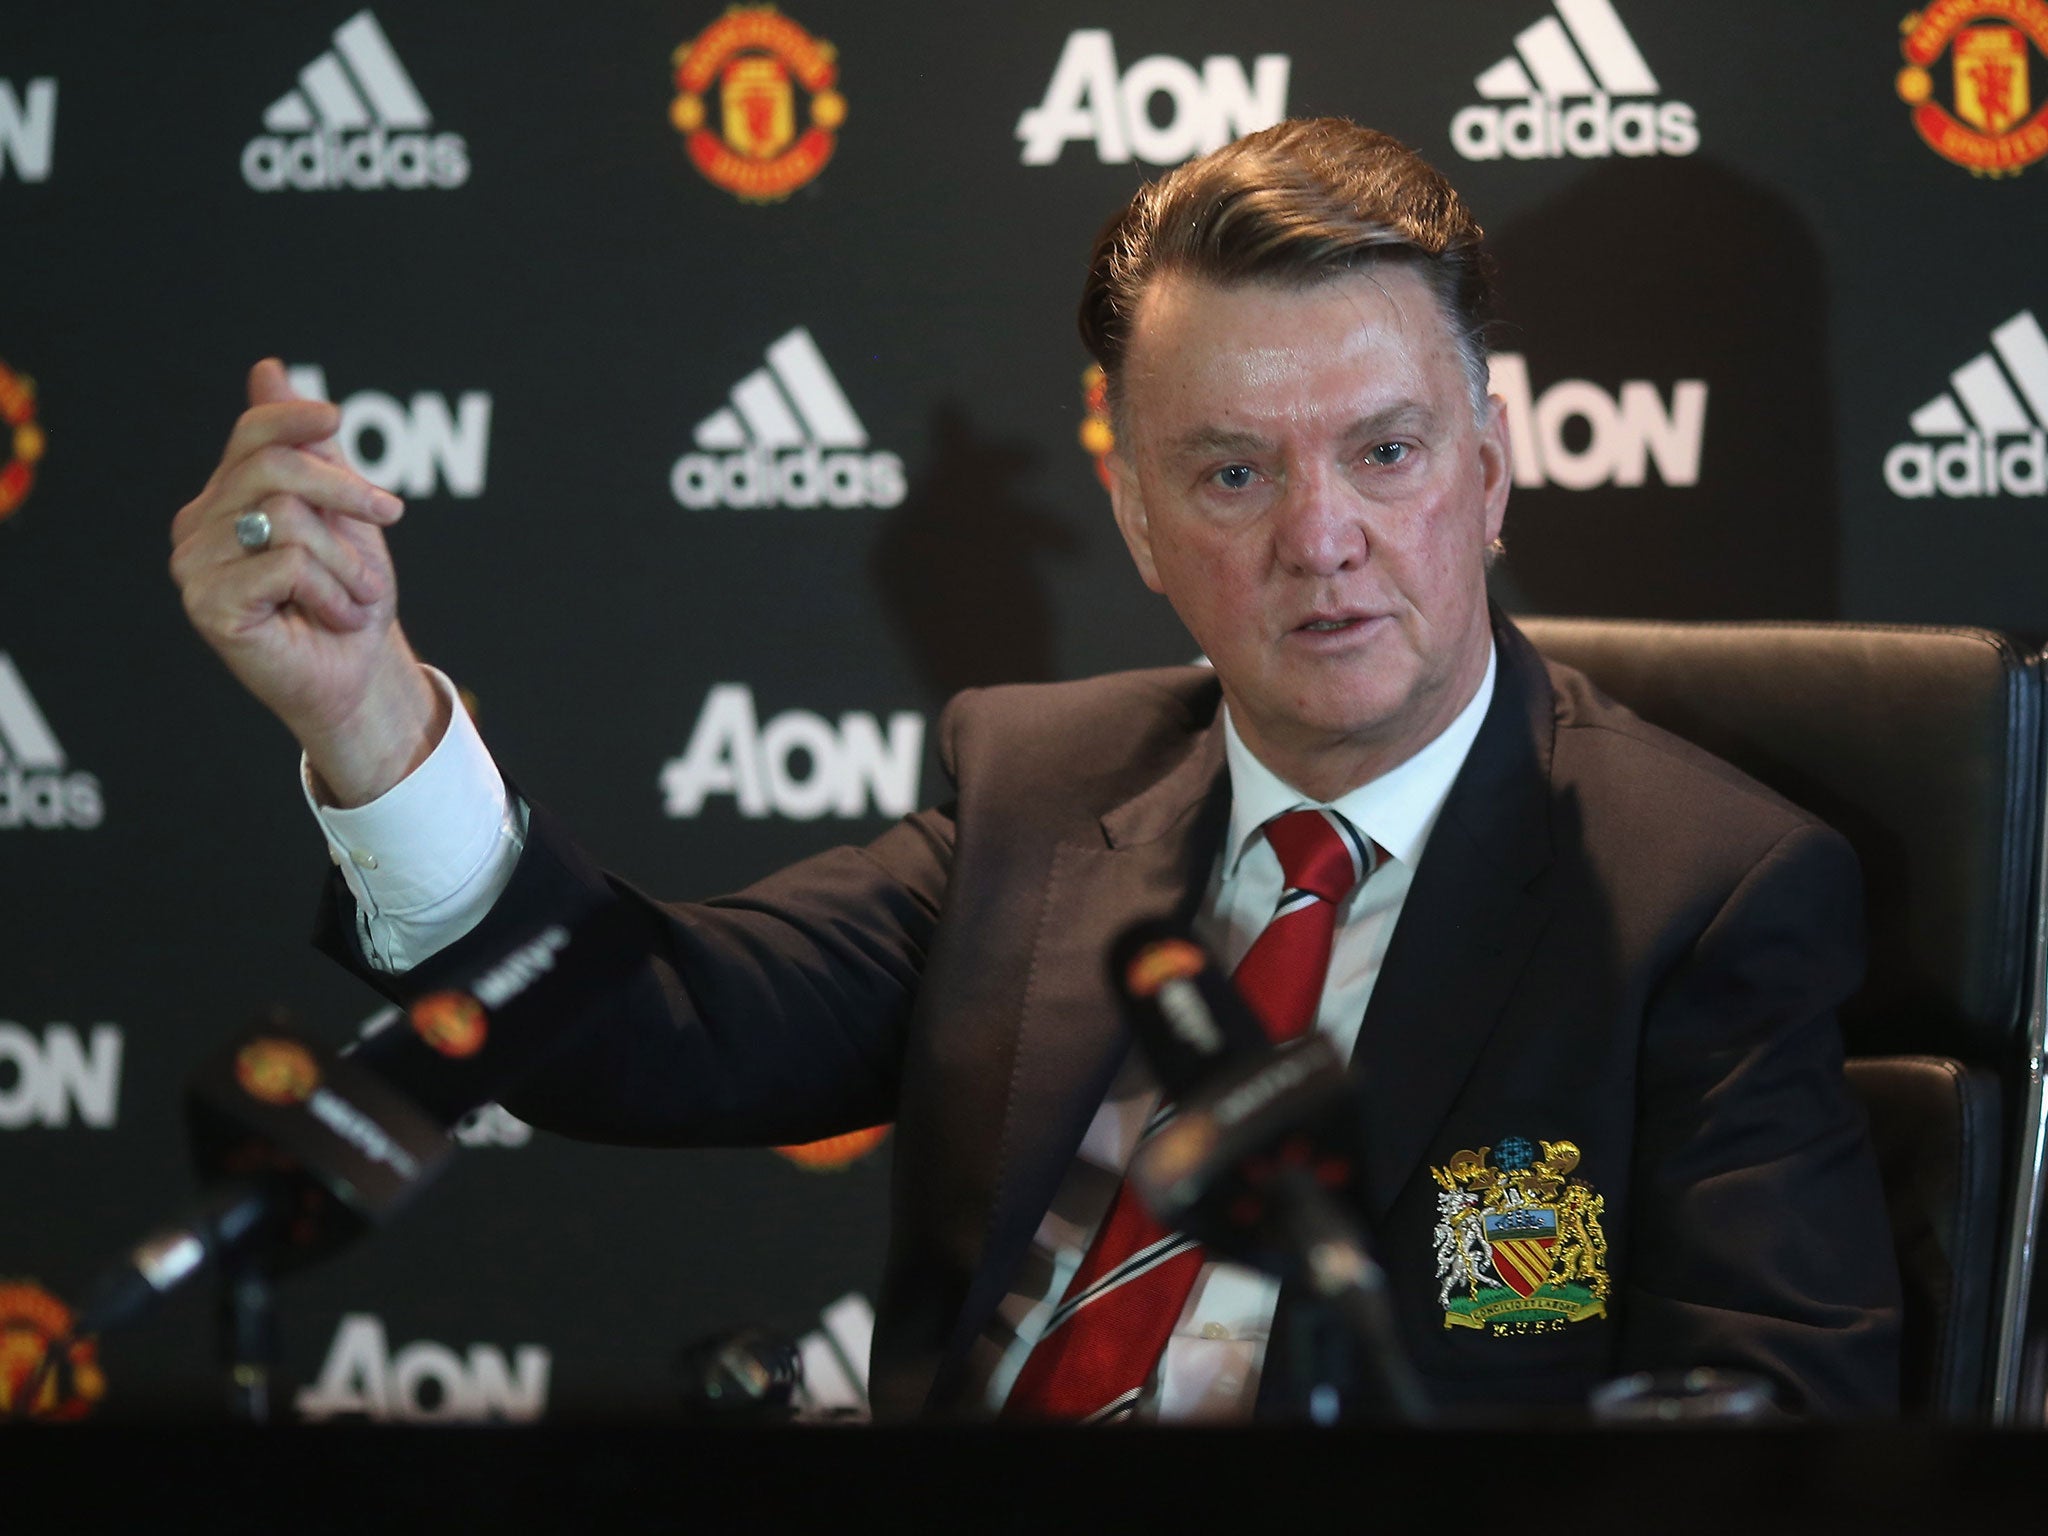 Manchester United manager Louis van Gaal says he is still the right man to lead the club